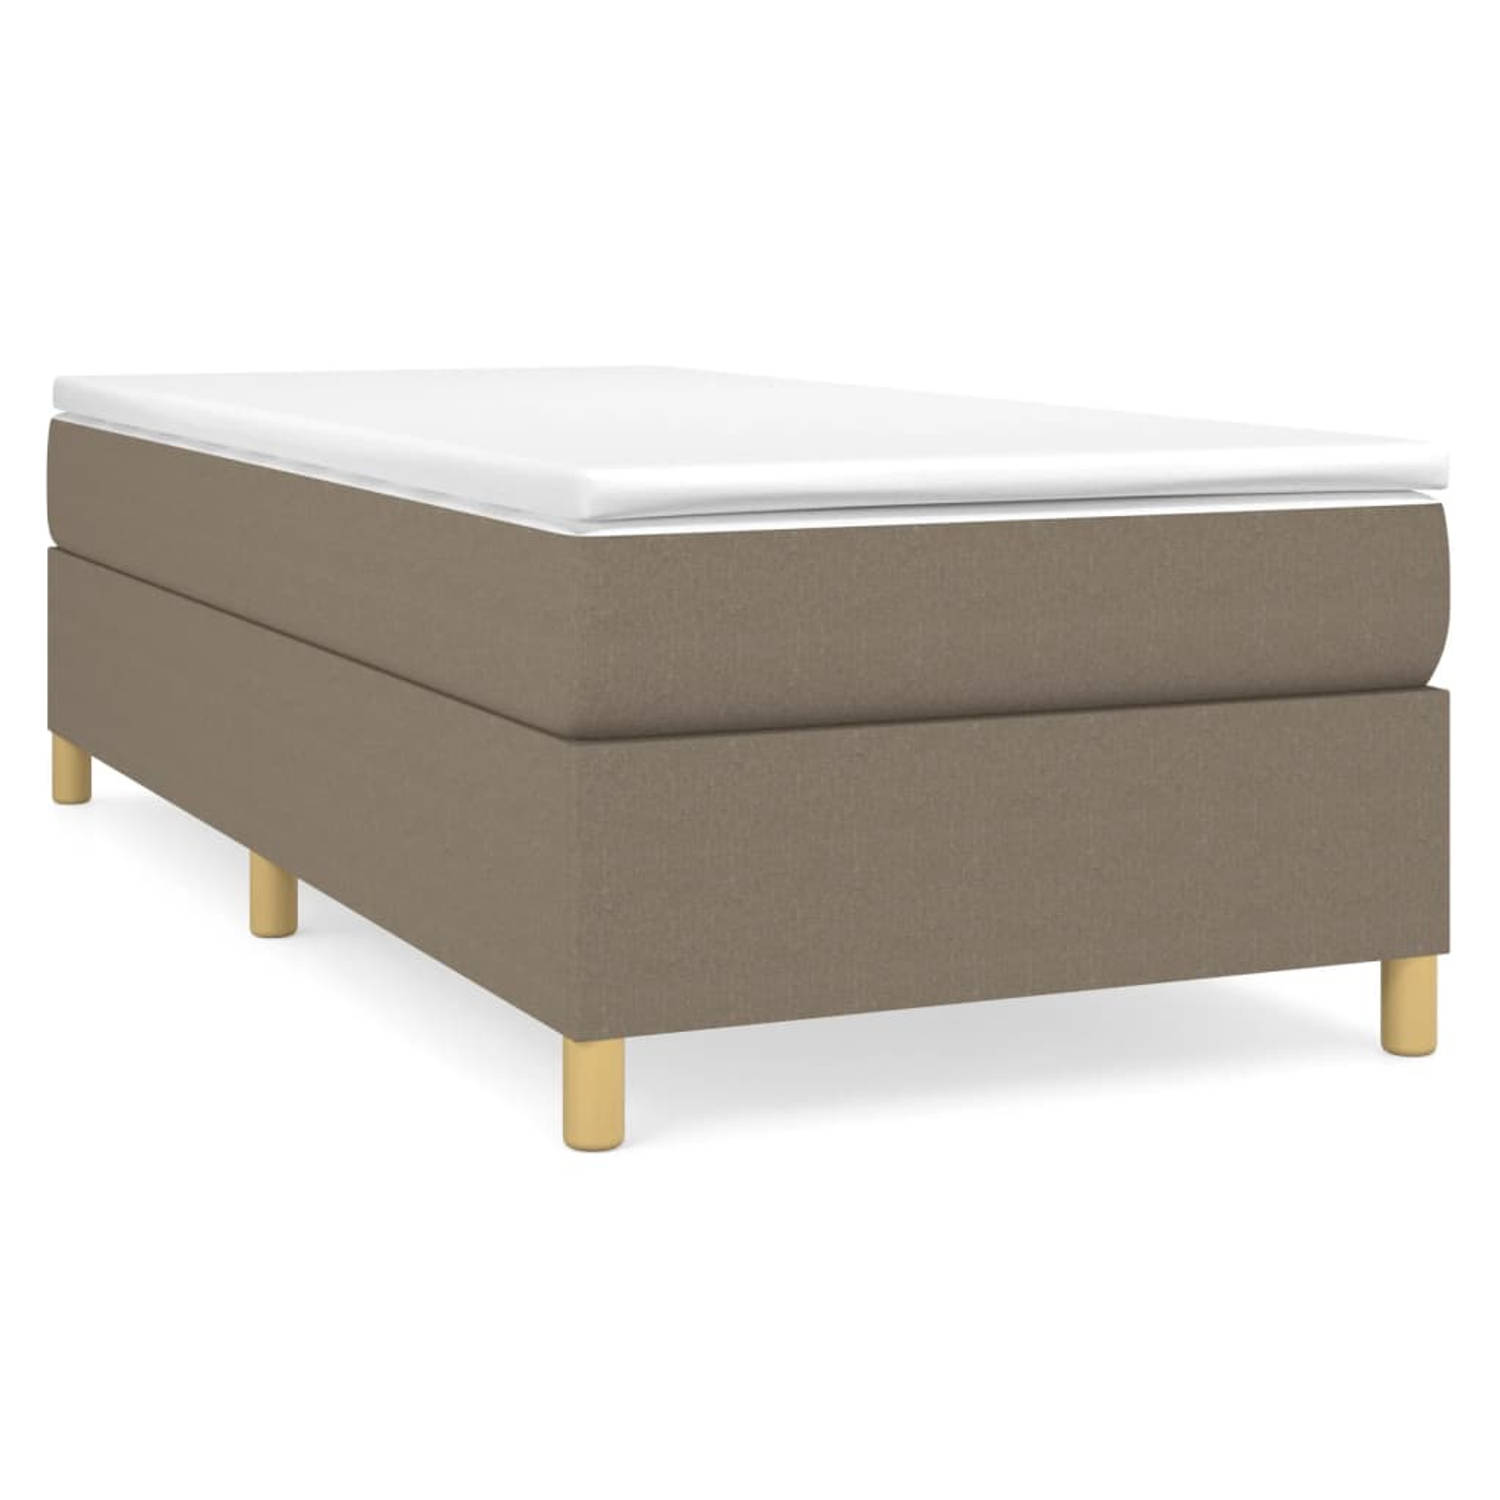 The Living Store Boxspringframe stof taupe 90x190 cm - Boxspringframe - Boxspringframes - Bed - Ledikant - Slaapmeubel - Bedframe - Bedbodem - Eenpersoonsbed - Boxspring - Bedden -